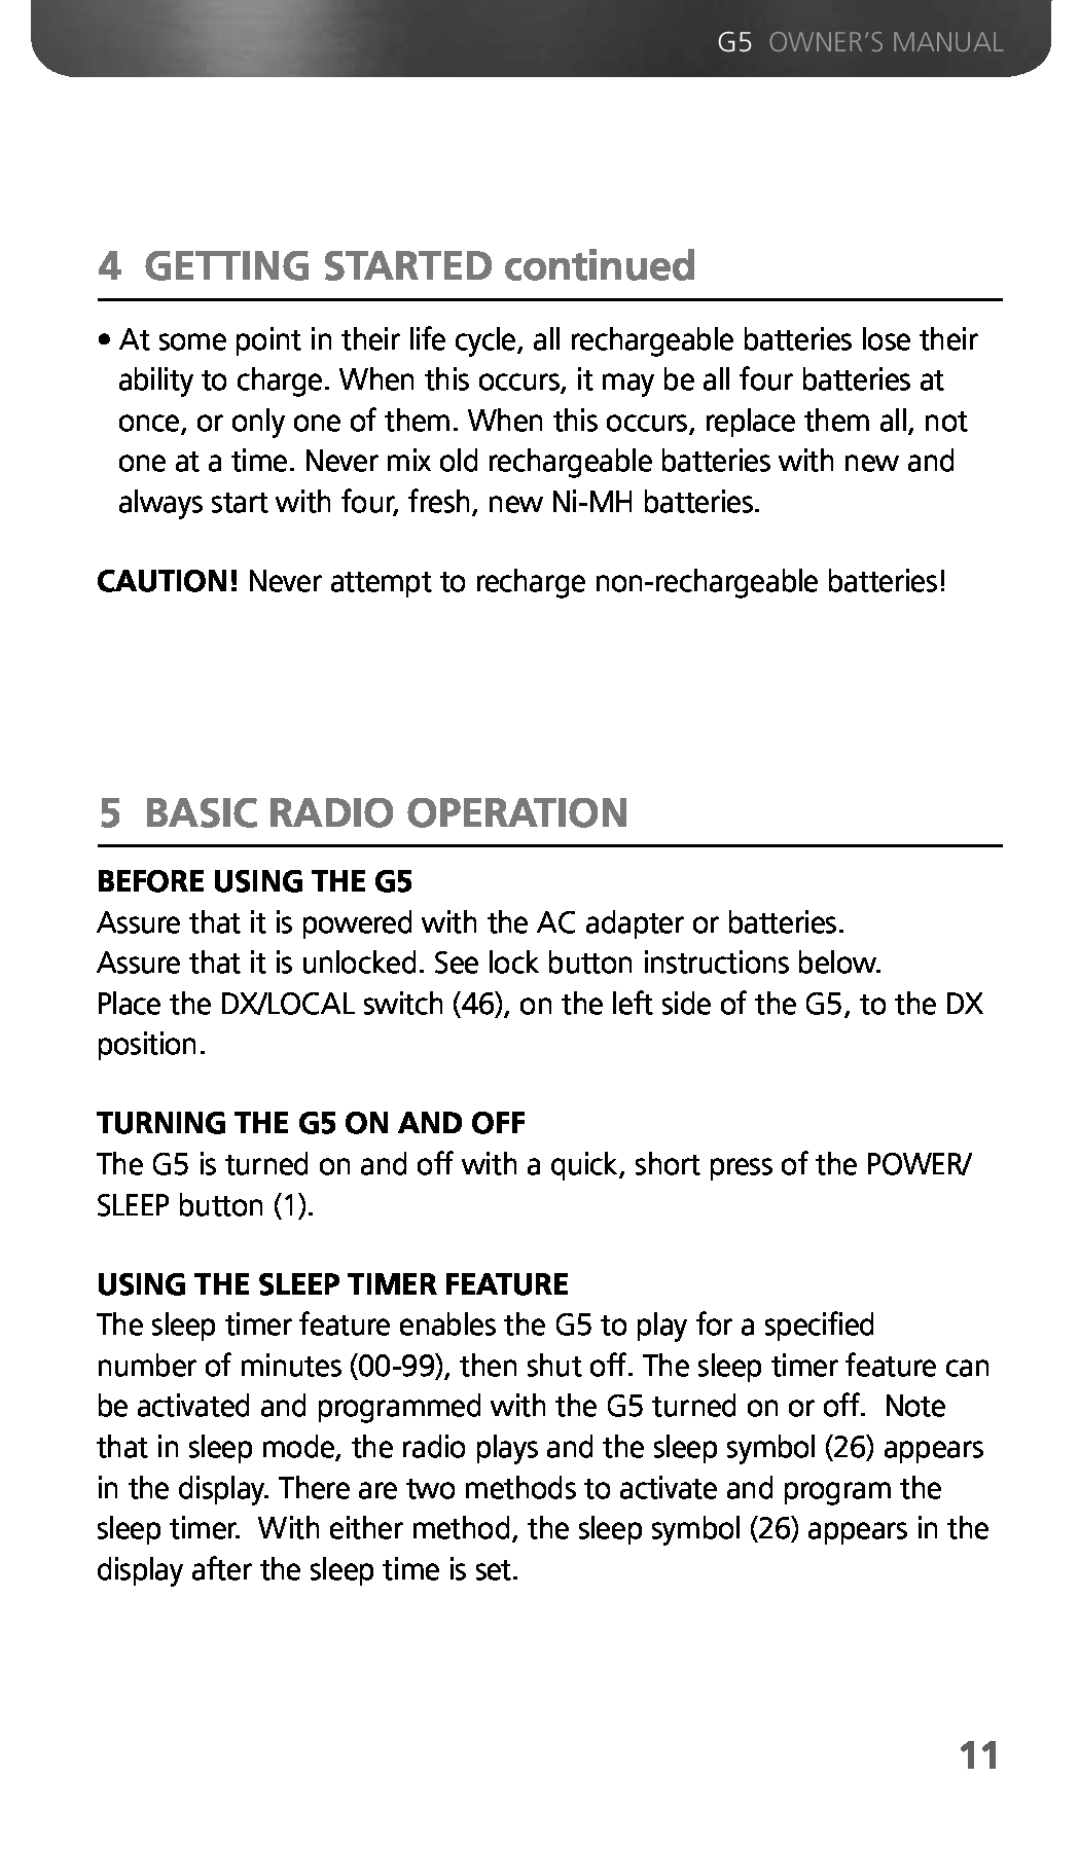 Eton owner manual Basic Radio Operation, GETTING STARTED continued, BEFORE USING THE G5, TURNING THE G5 ON AND OFF 